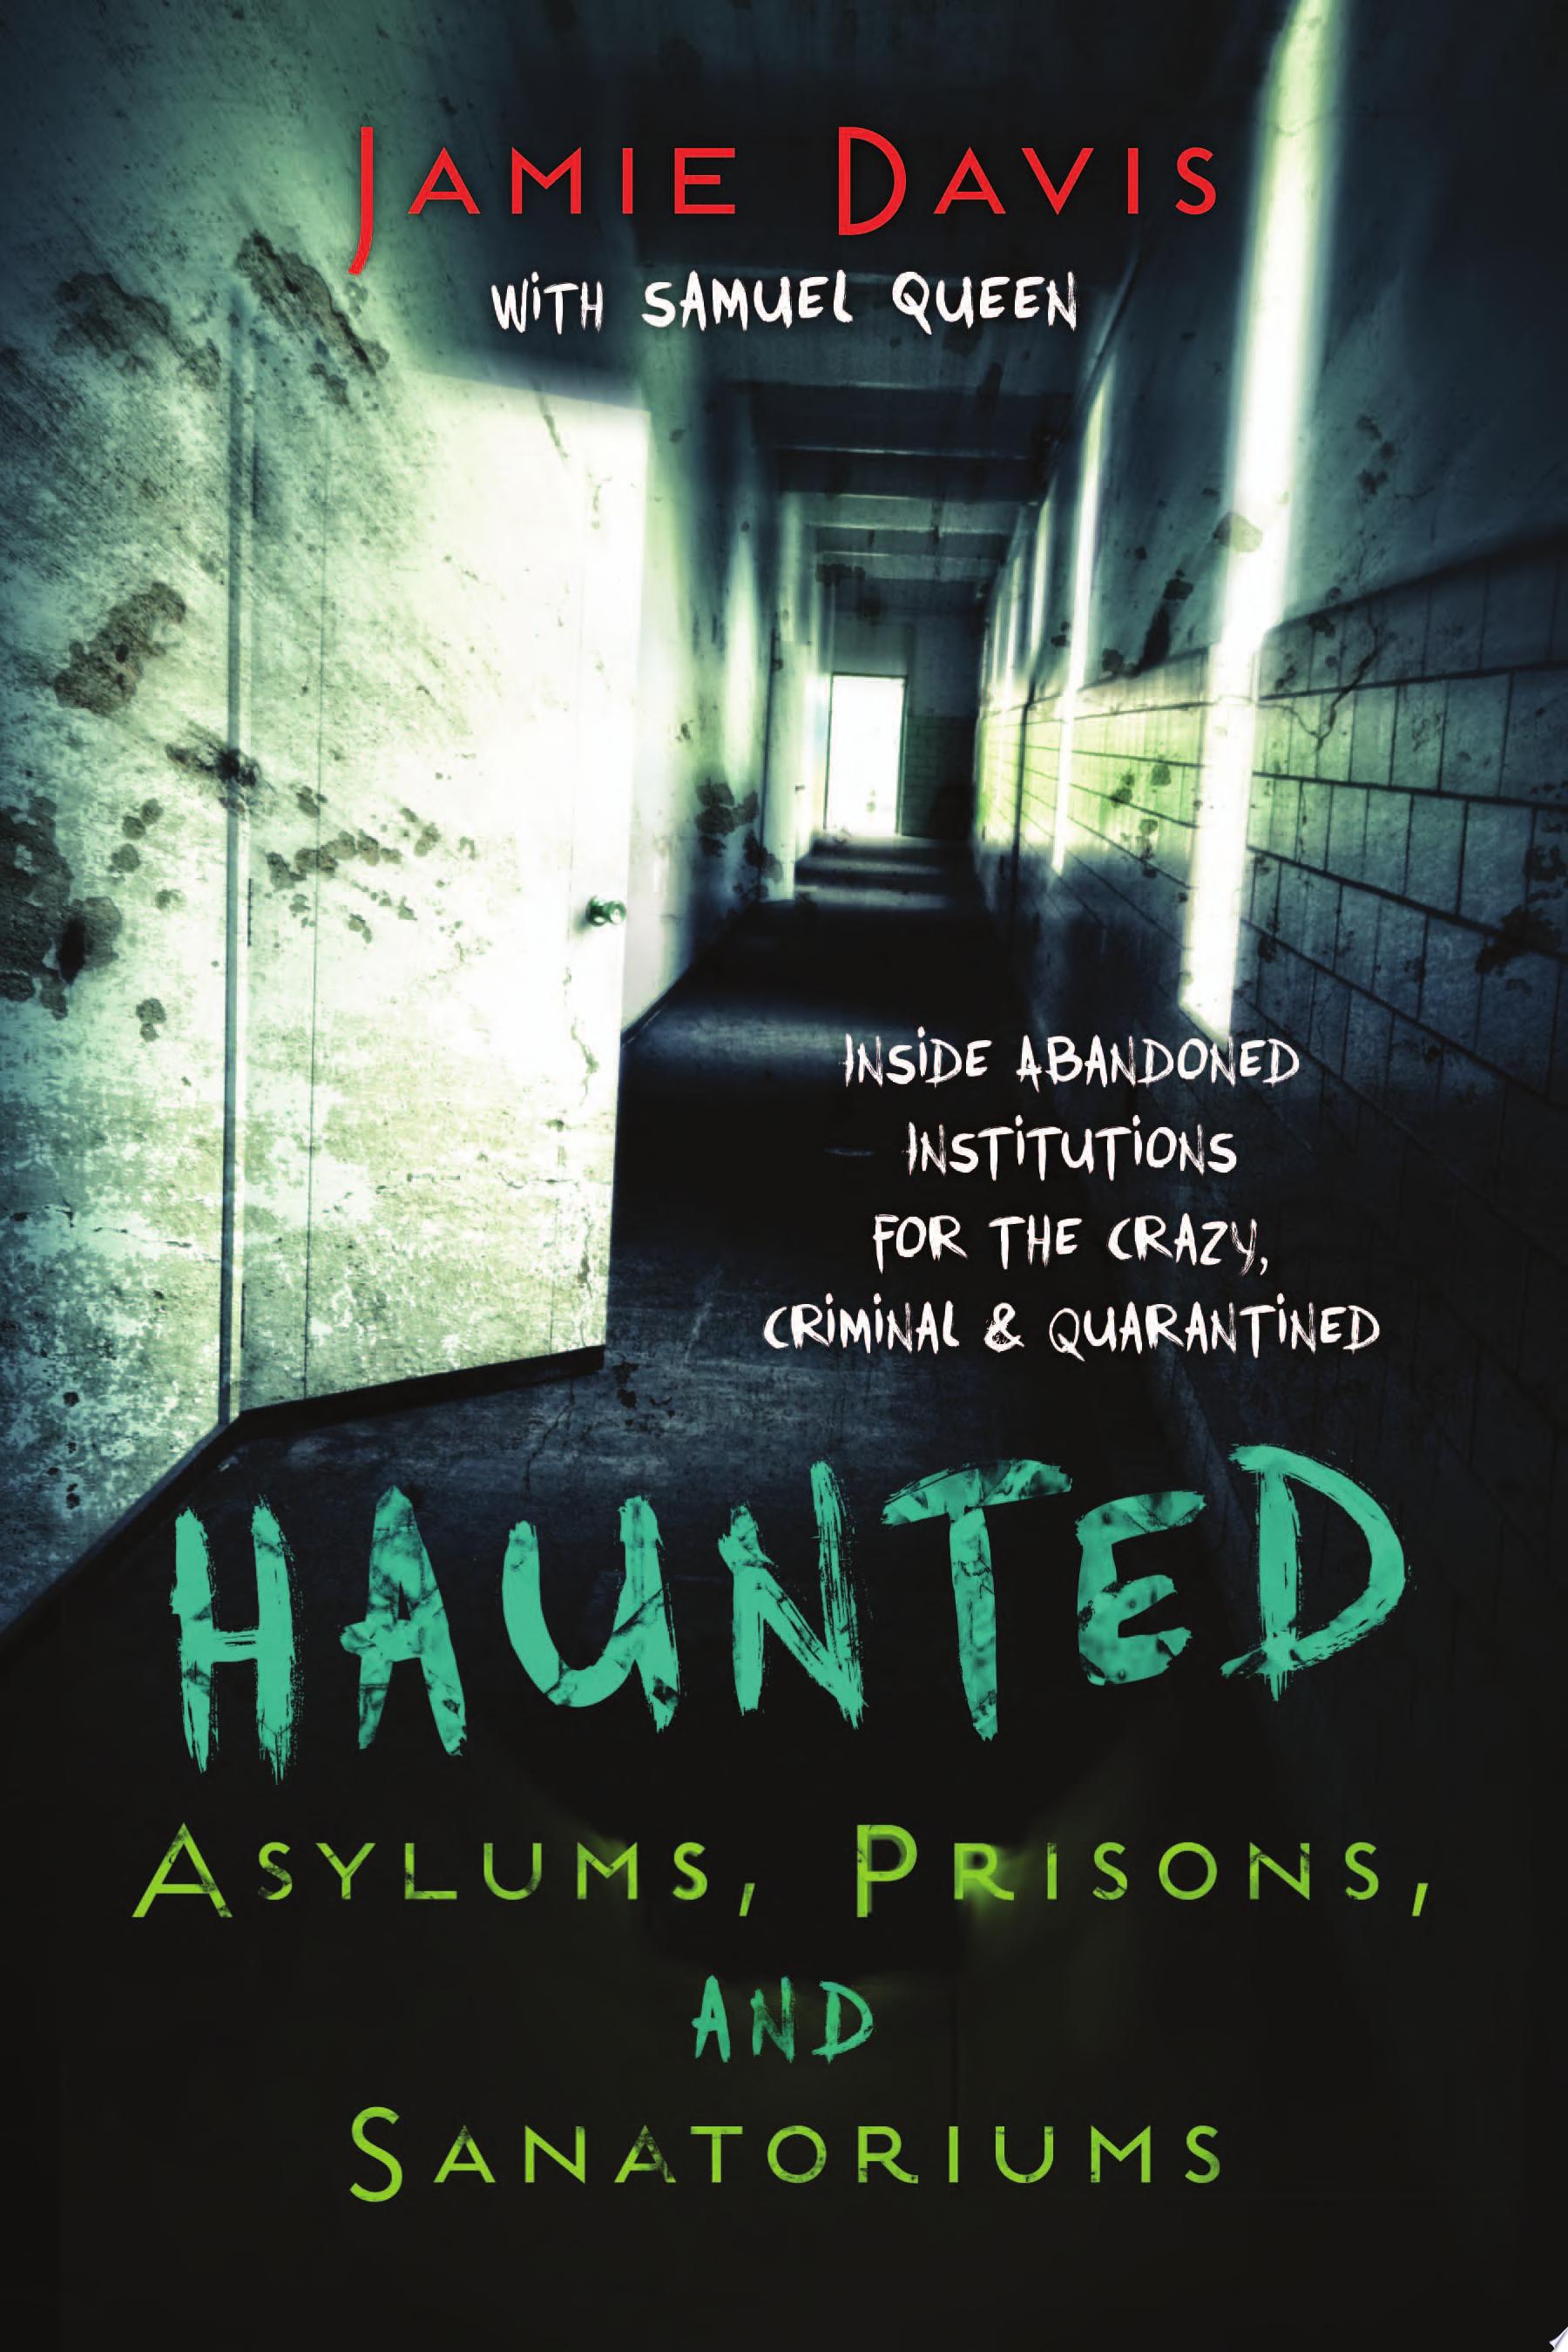 Image for "Haunted Asylums, Prisons, and Sanatoriums"